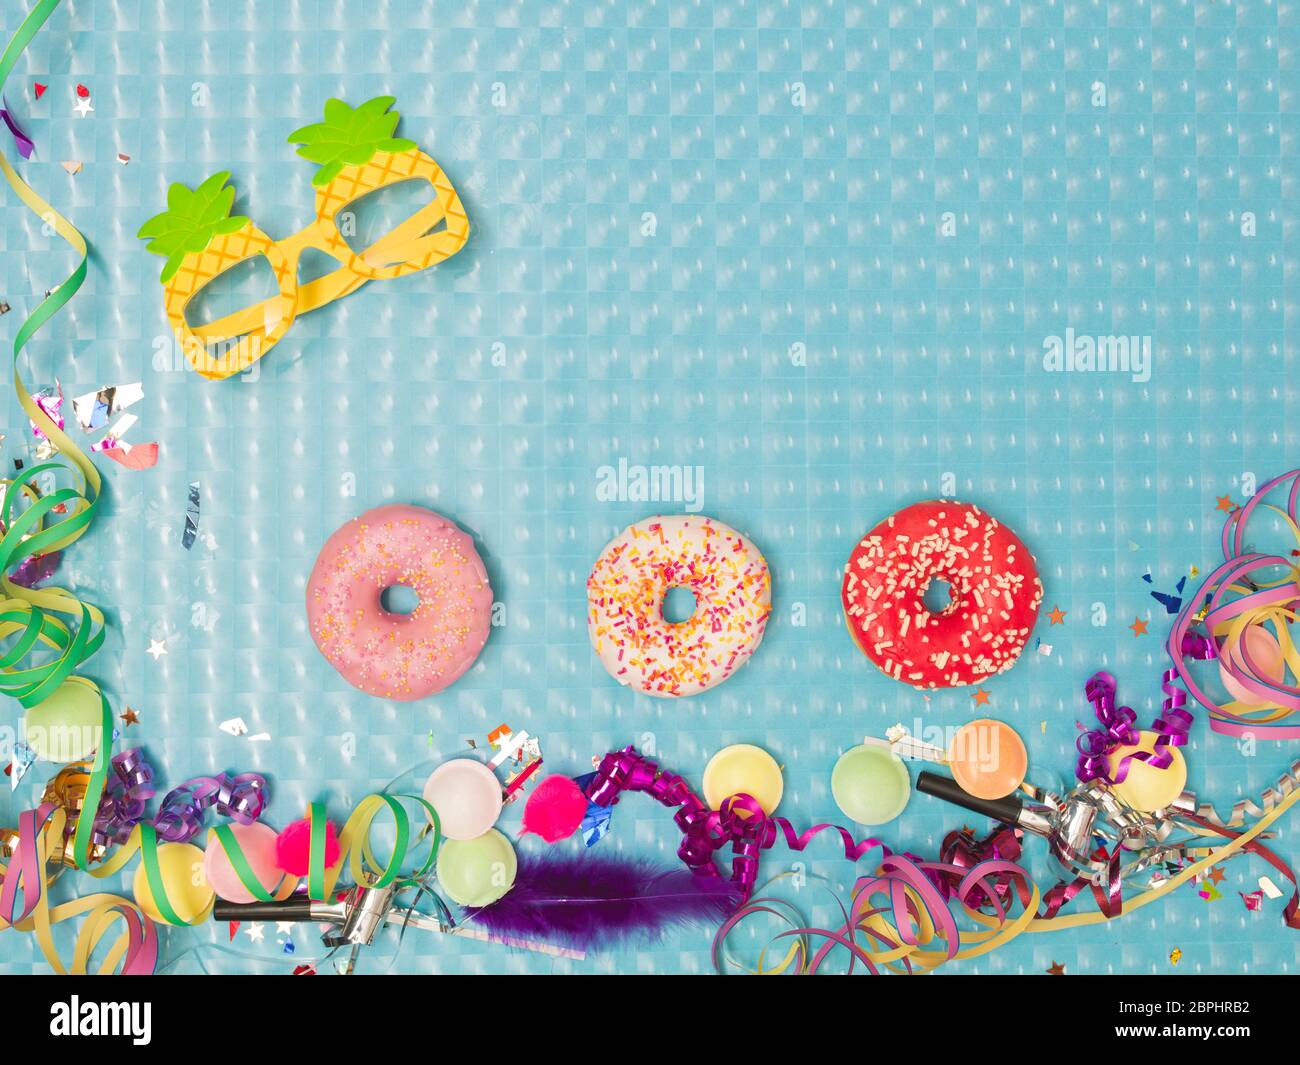 special blue effect background with donuts and doughnuts and carnival items Stock Photo